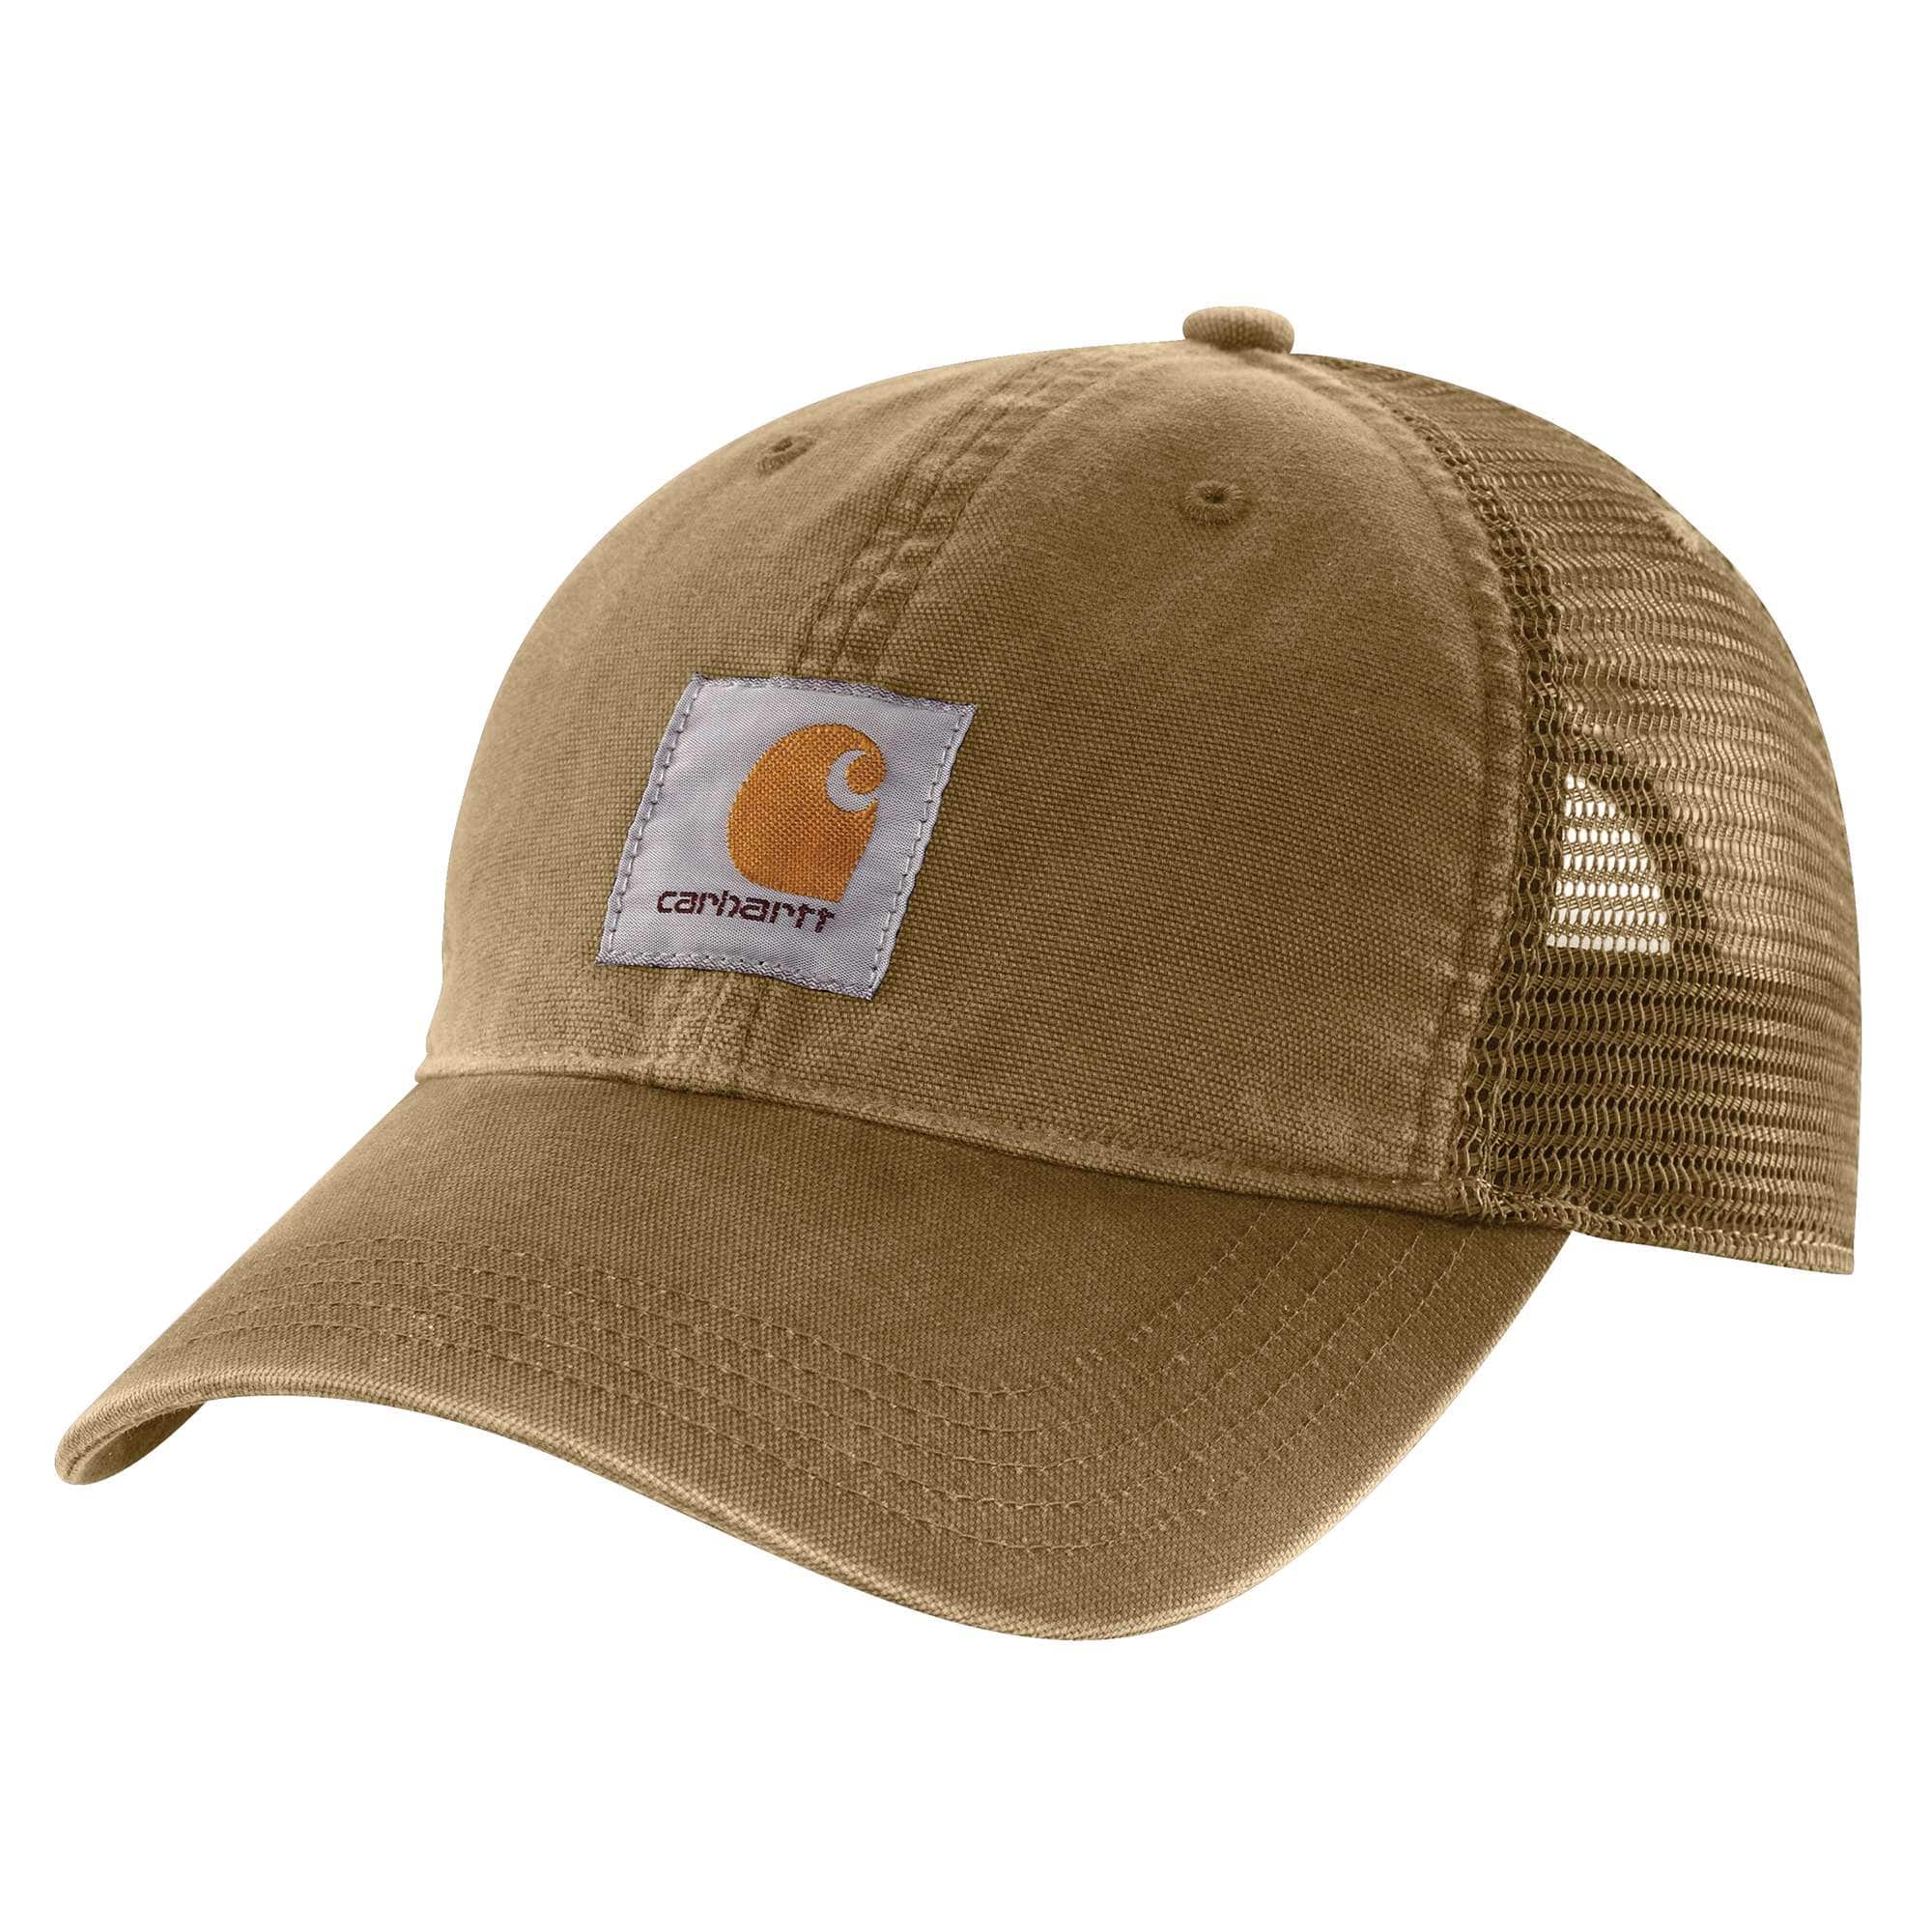 Fishing Gear & Clothing for Anglers, Carhartt